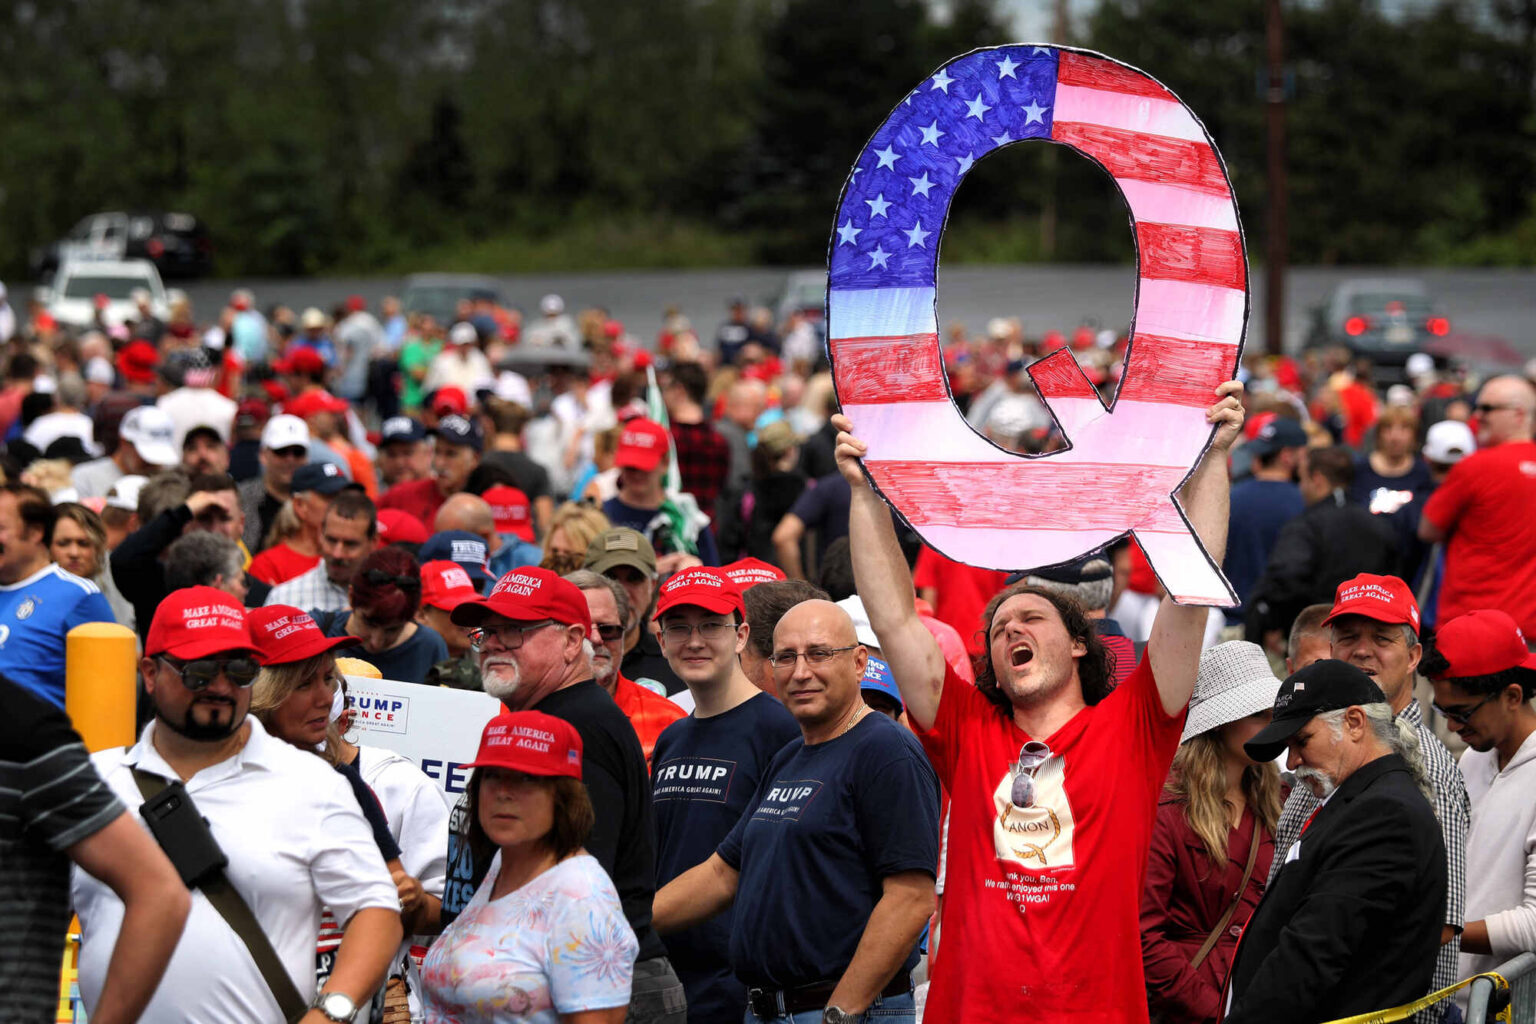 QAnon is known for spreading their easily debunked rhetoric all over the web. Find out what QAnon has to say about the impeachment trial news here.